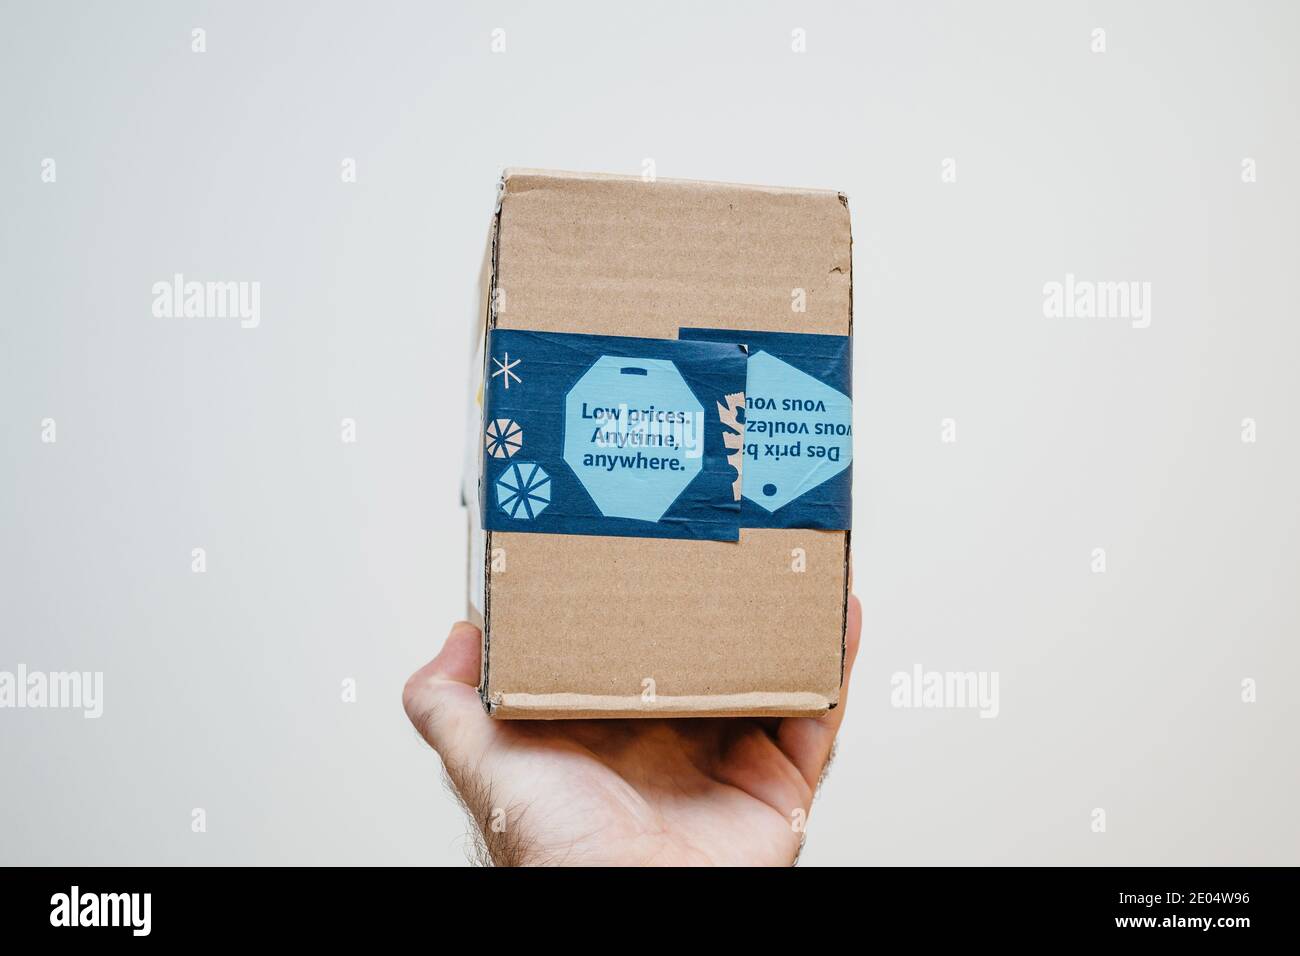 Paris, France - Dec 12, 2020: POV male hand holding parcel package from  Amazon Prime with Low Price Anytime, Anywhere advertising on the package -  isolated on white Stock Photo - Alamy